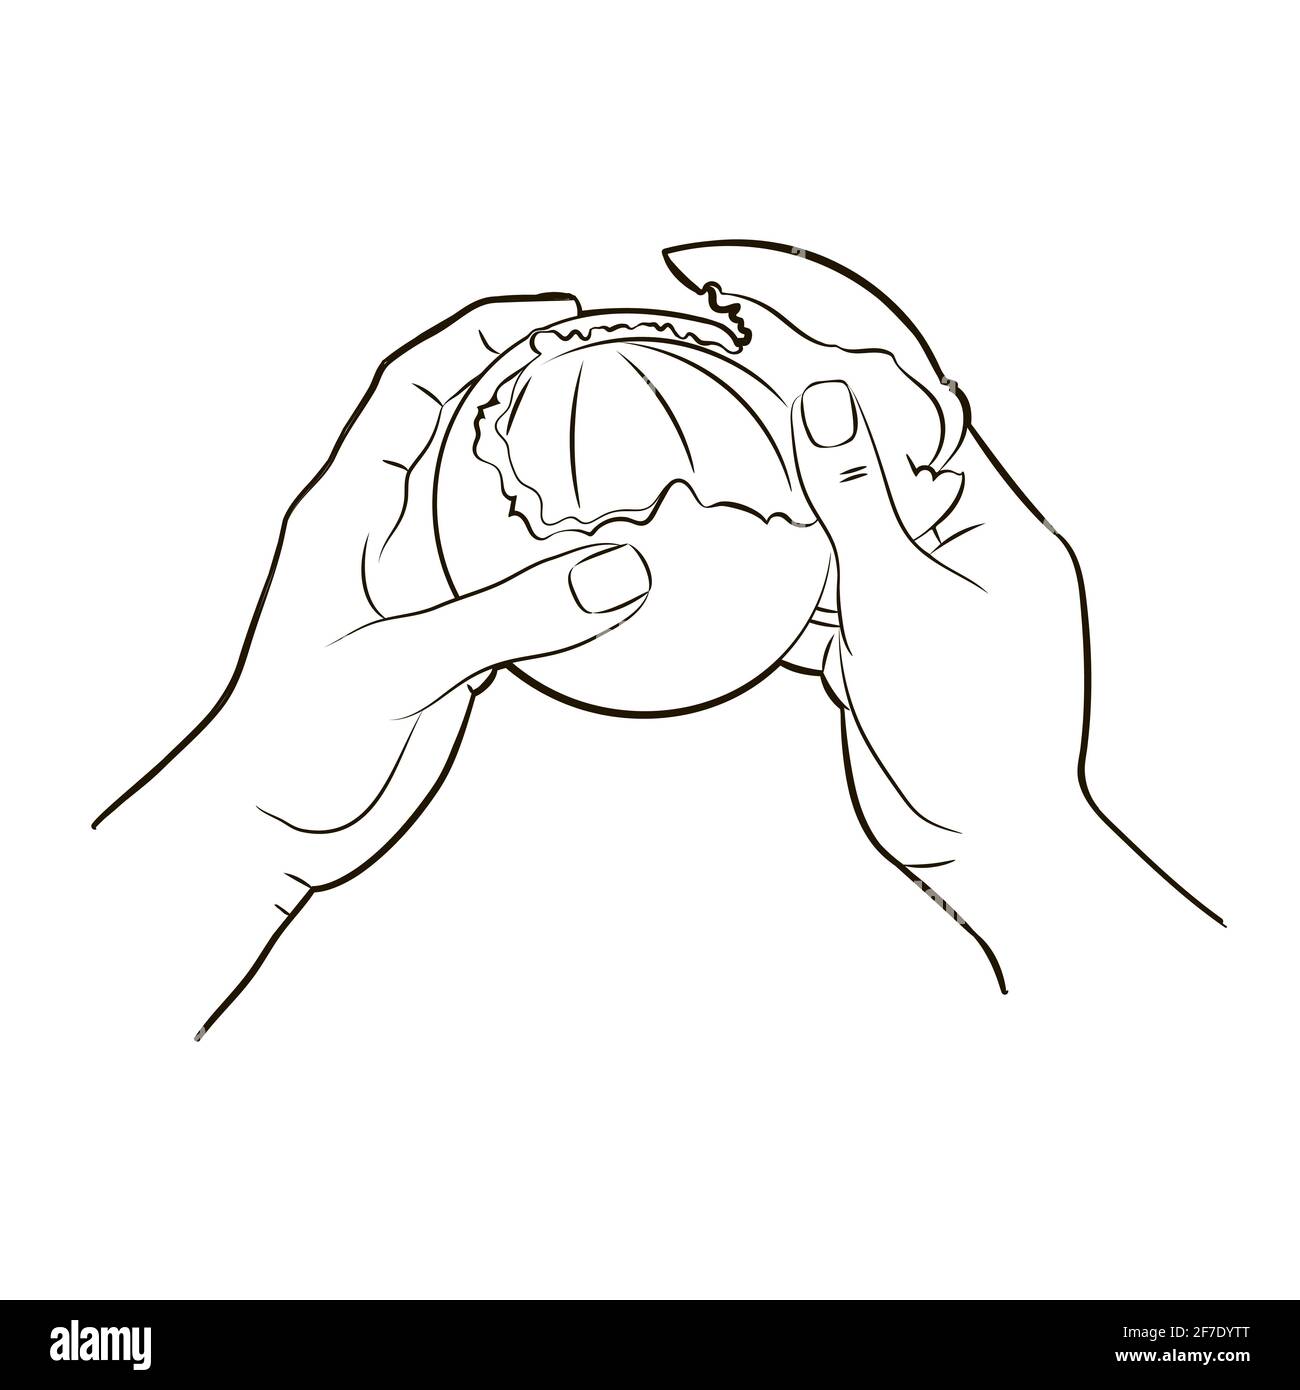 Hands, peel the orange peel by removing the orange peel from the pulp, top view.Vector illustration in sketch style, black and white isolated line art Stock Vector